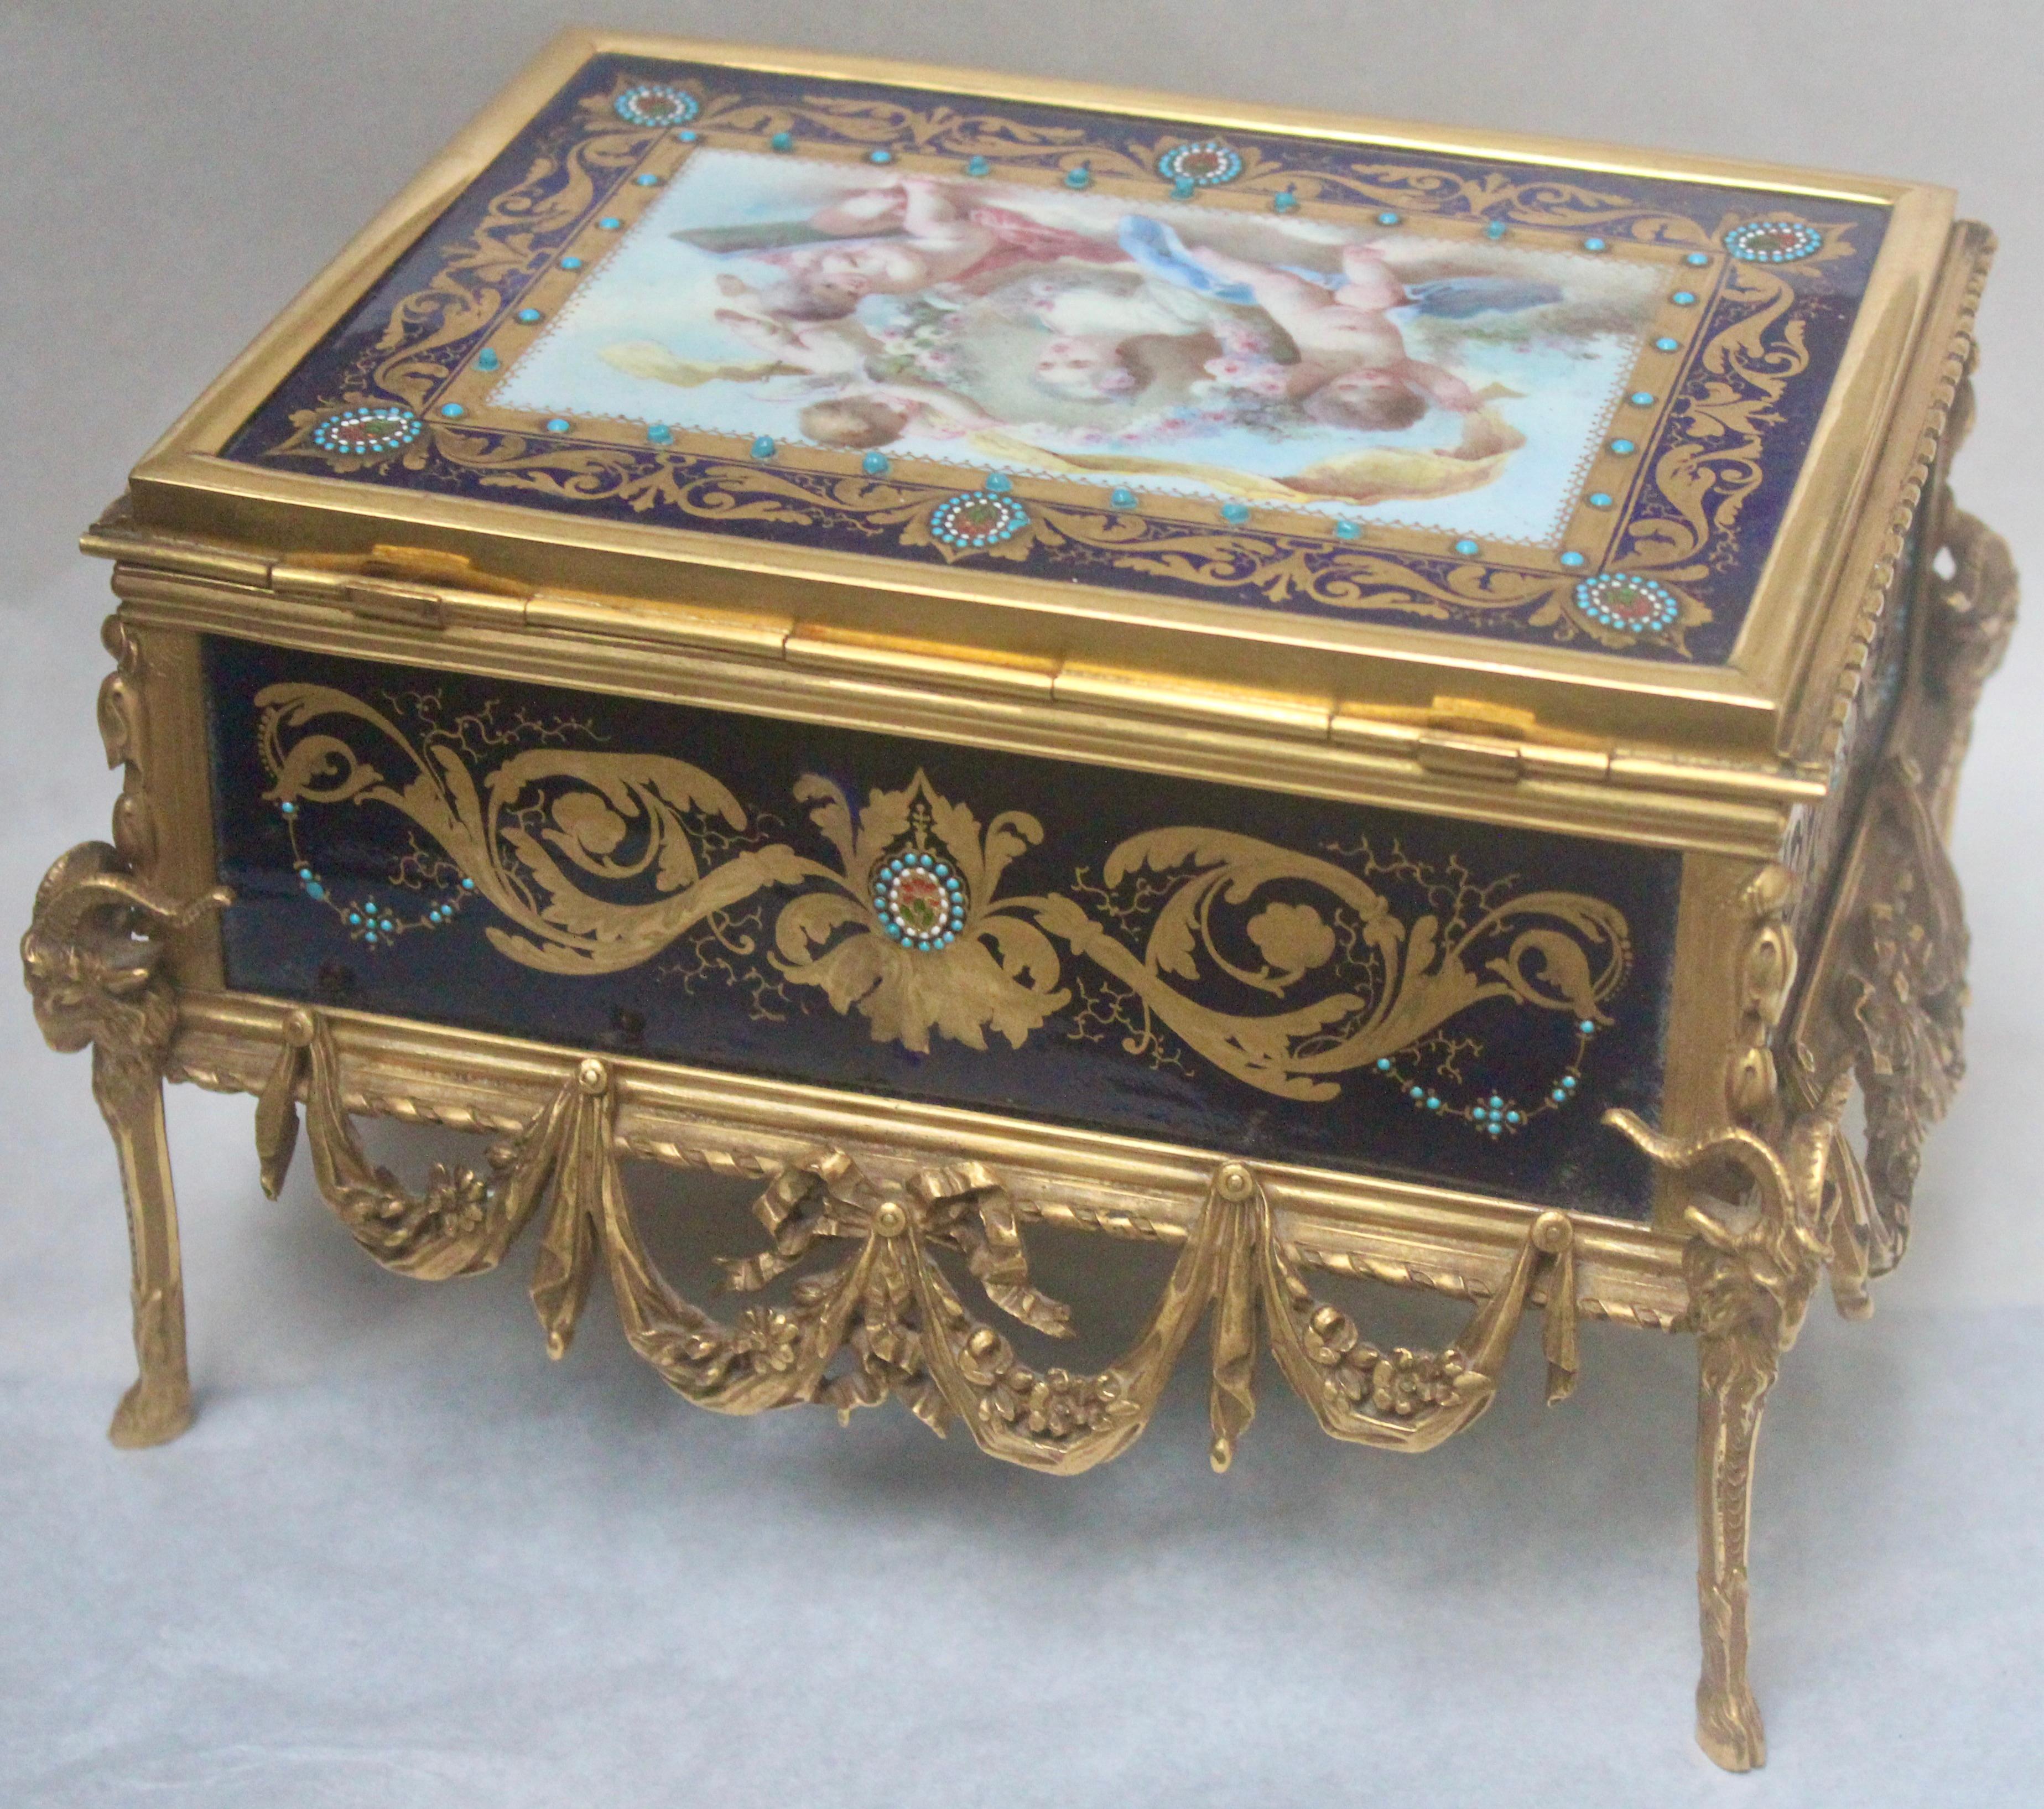 Late 19th Century French 19th Century Enameled and Ormolu-Mounted Jewelry Casket